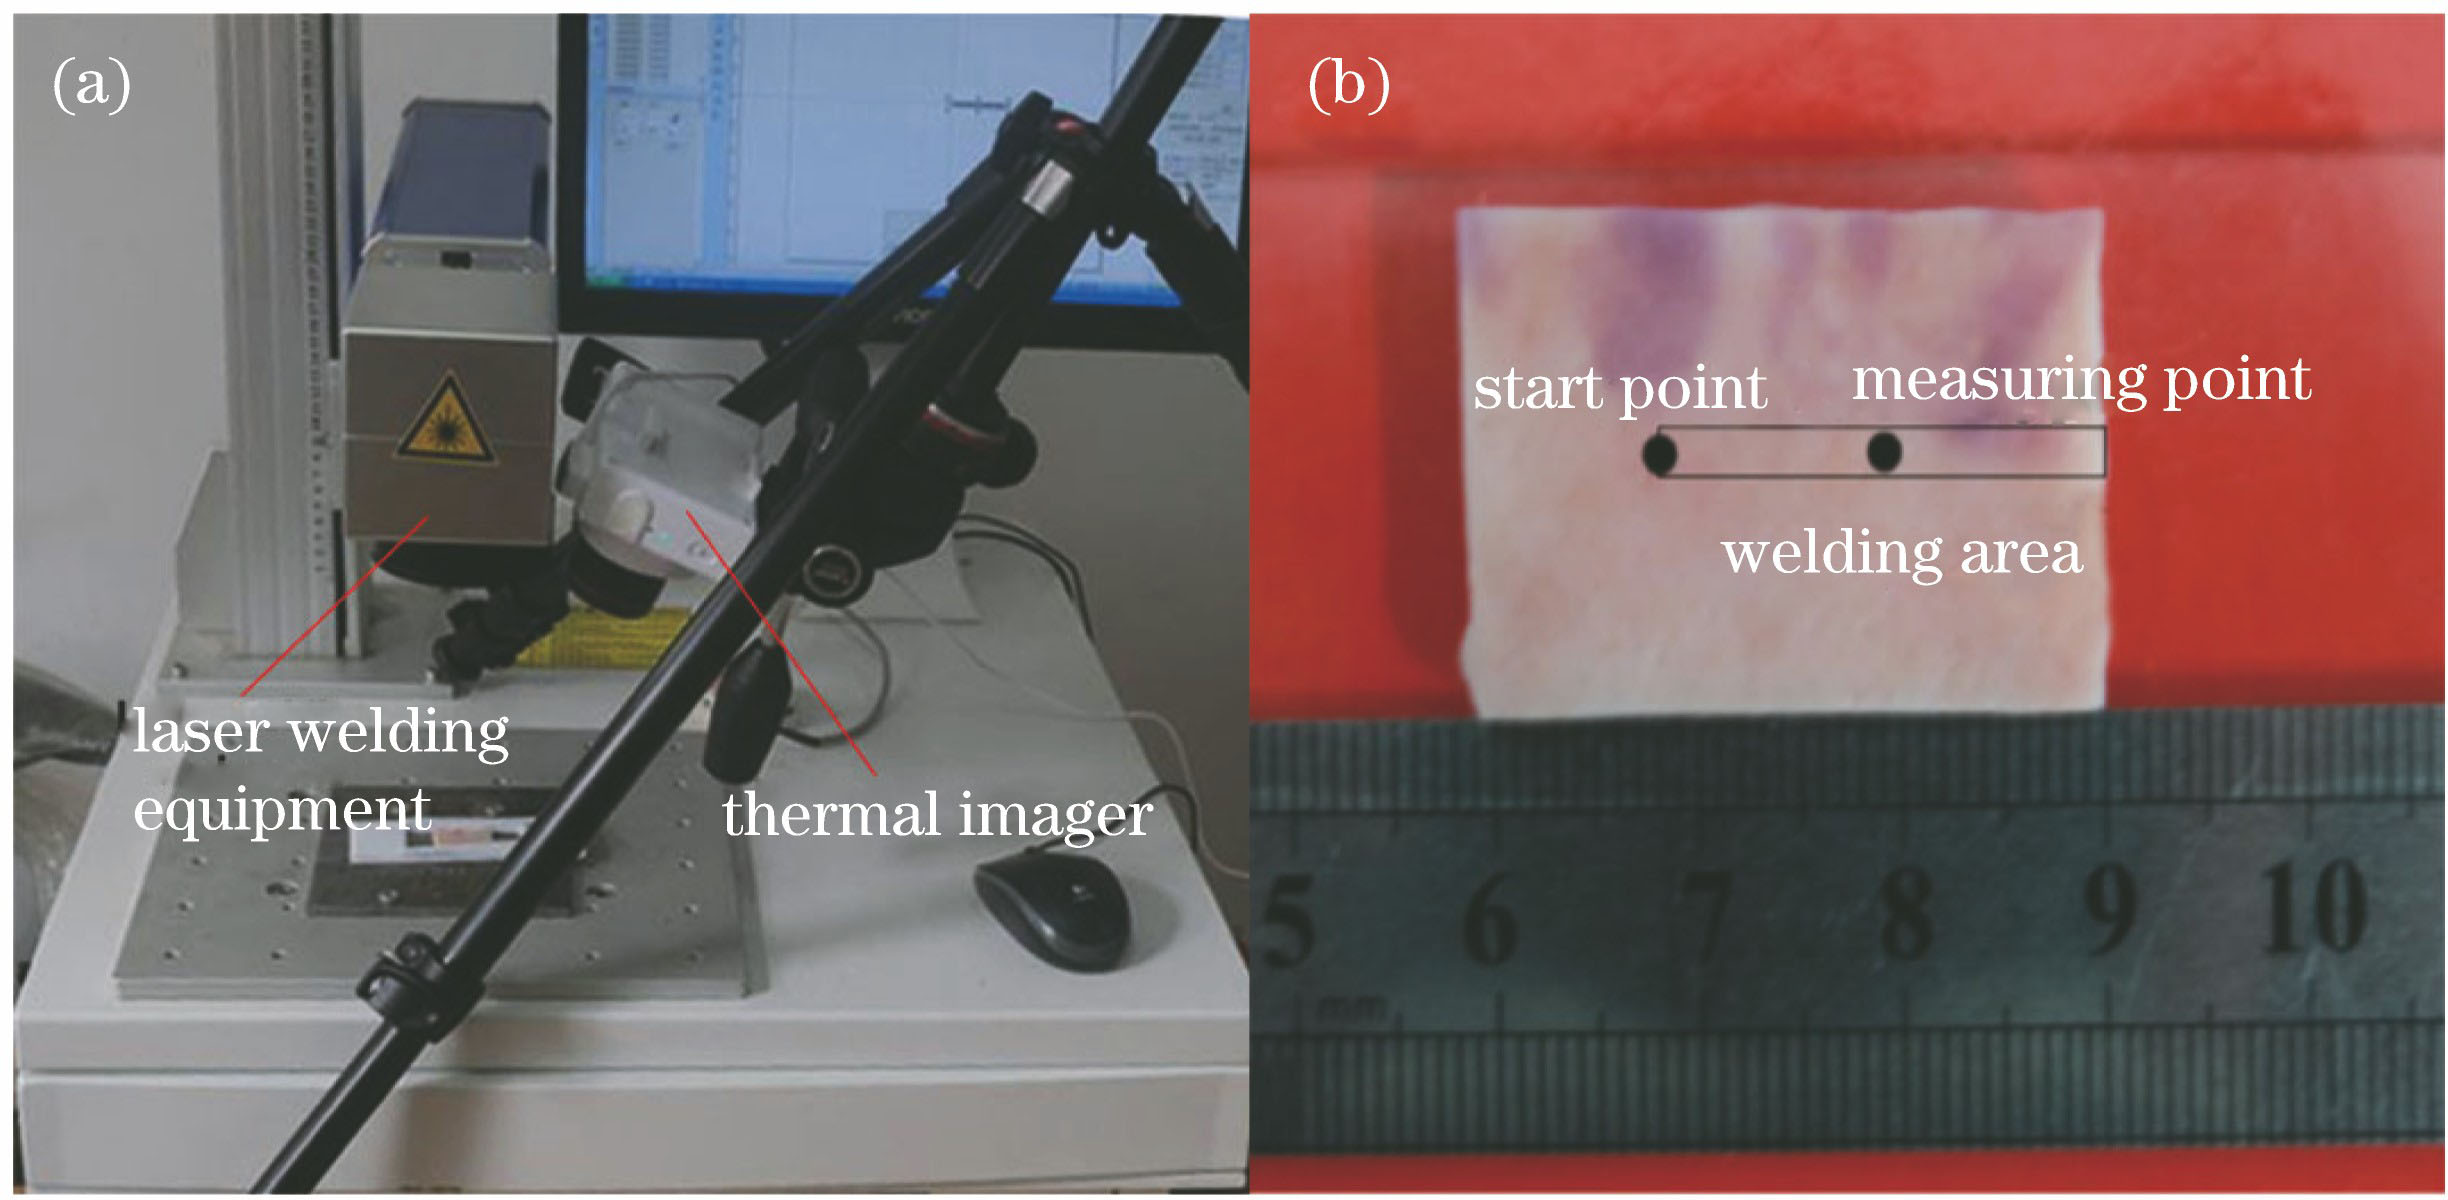 Experimental instrument and sample. (a) Laser for biological tissue welding and thermal imager; (b) skin sample in vitro and welding position